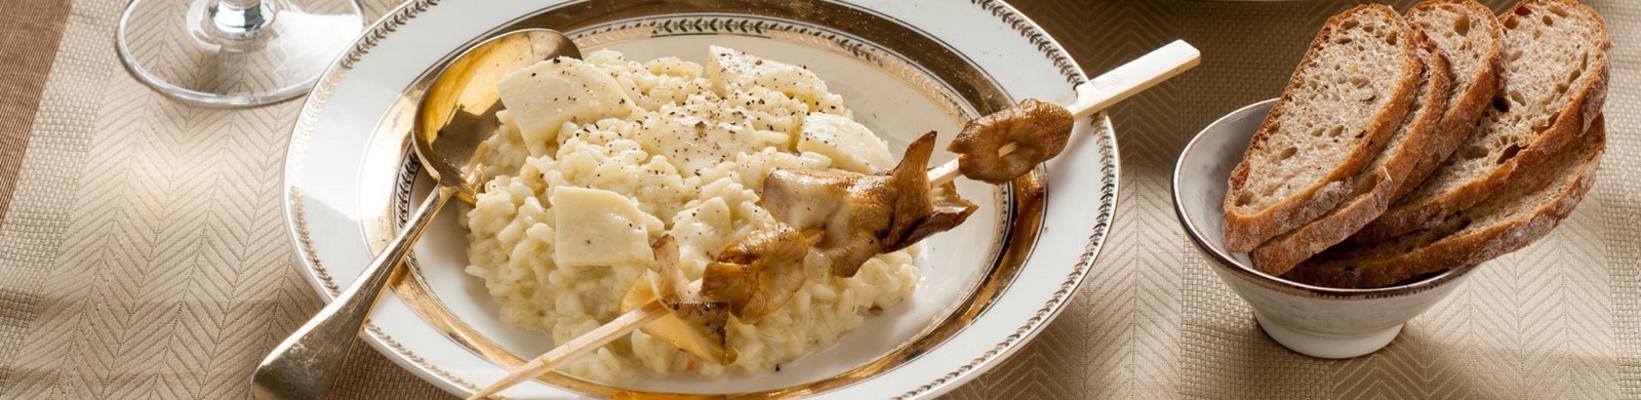 white risotto with oyster mushrooms